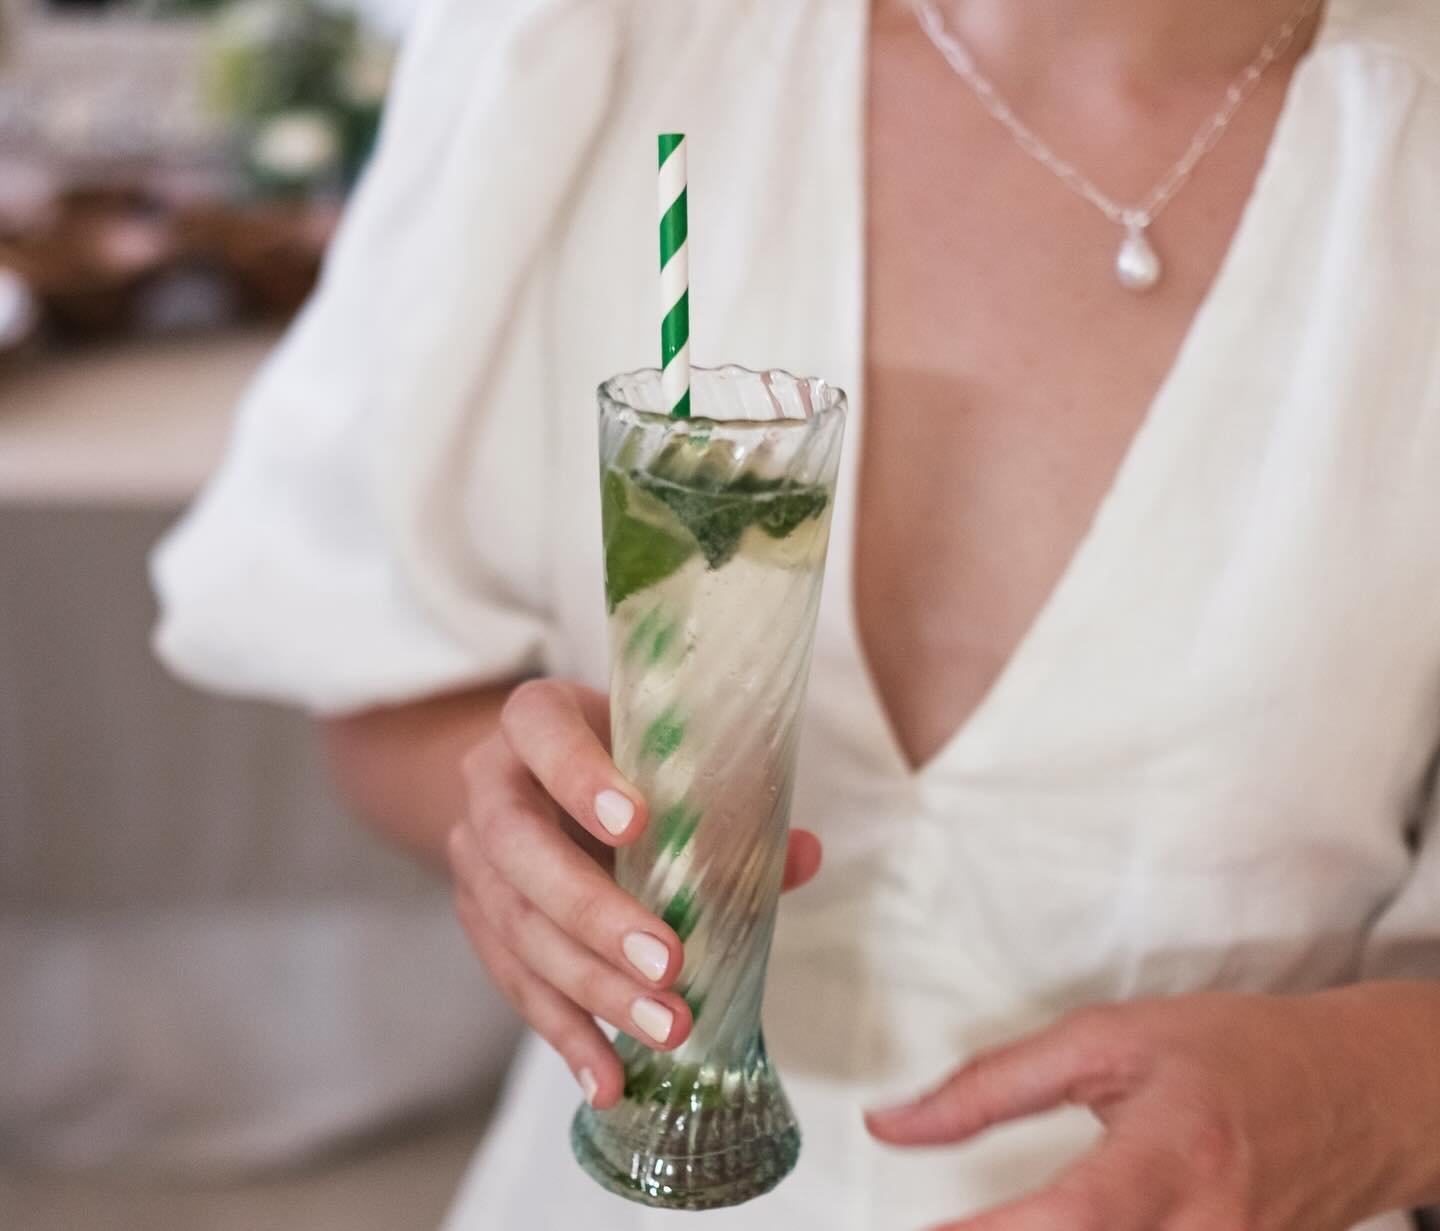 Embrace wedding season with sustainable elegance! 🍾✨ Gift your loved ones something truly unique and eco-friendly, or elevate your wedding reception with our recycled glassware 🌿💍✨

#recycledglassware #champagneflute #weddingglasseshandmade #weddi